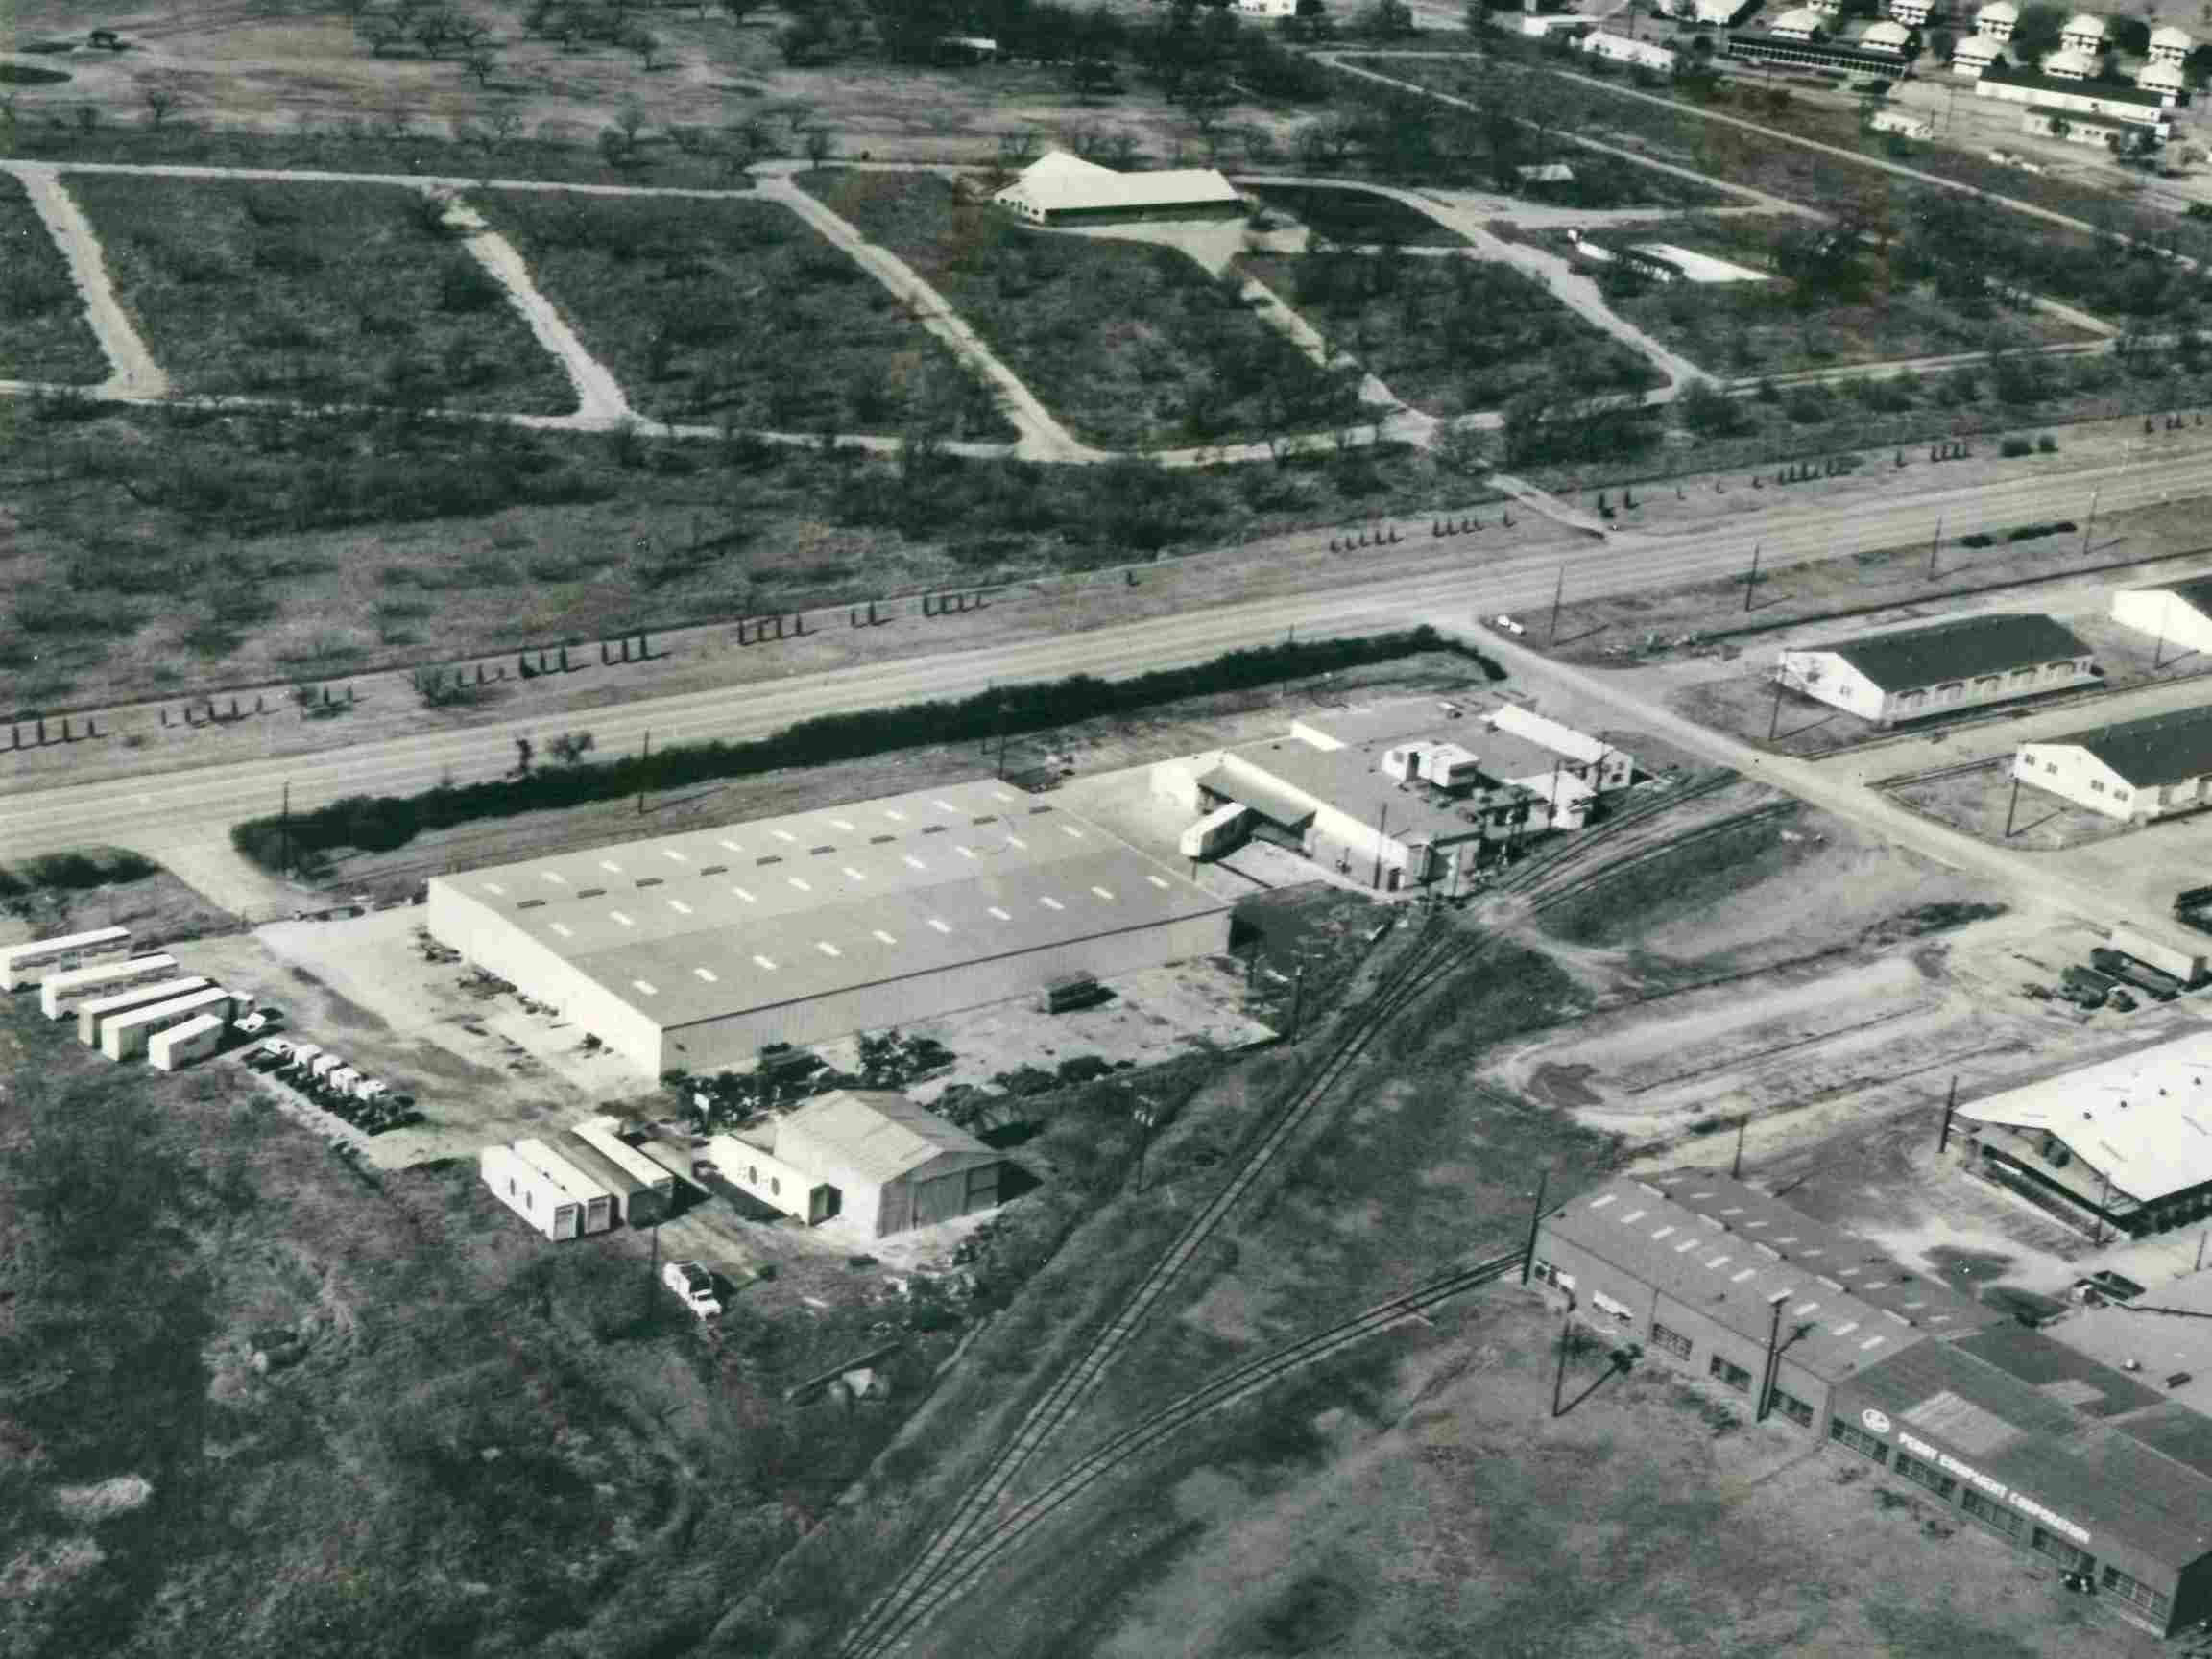 Old black and white photo showing an aerial view of the Ventamatic business in Mineral Wells, Texas in the 1970's.